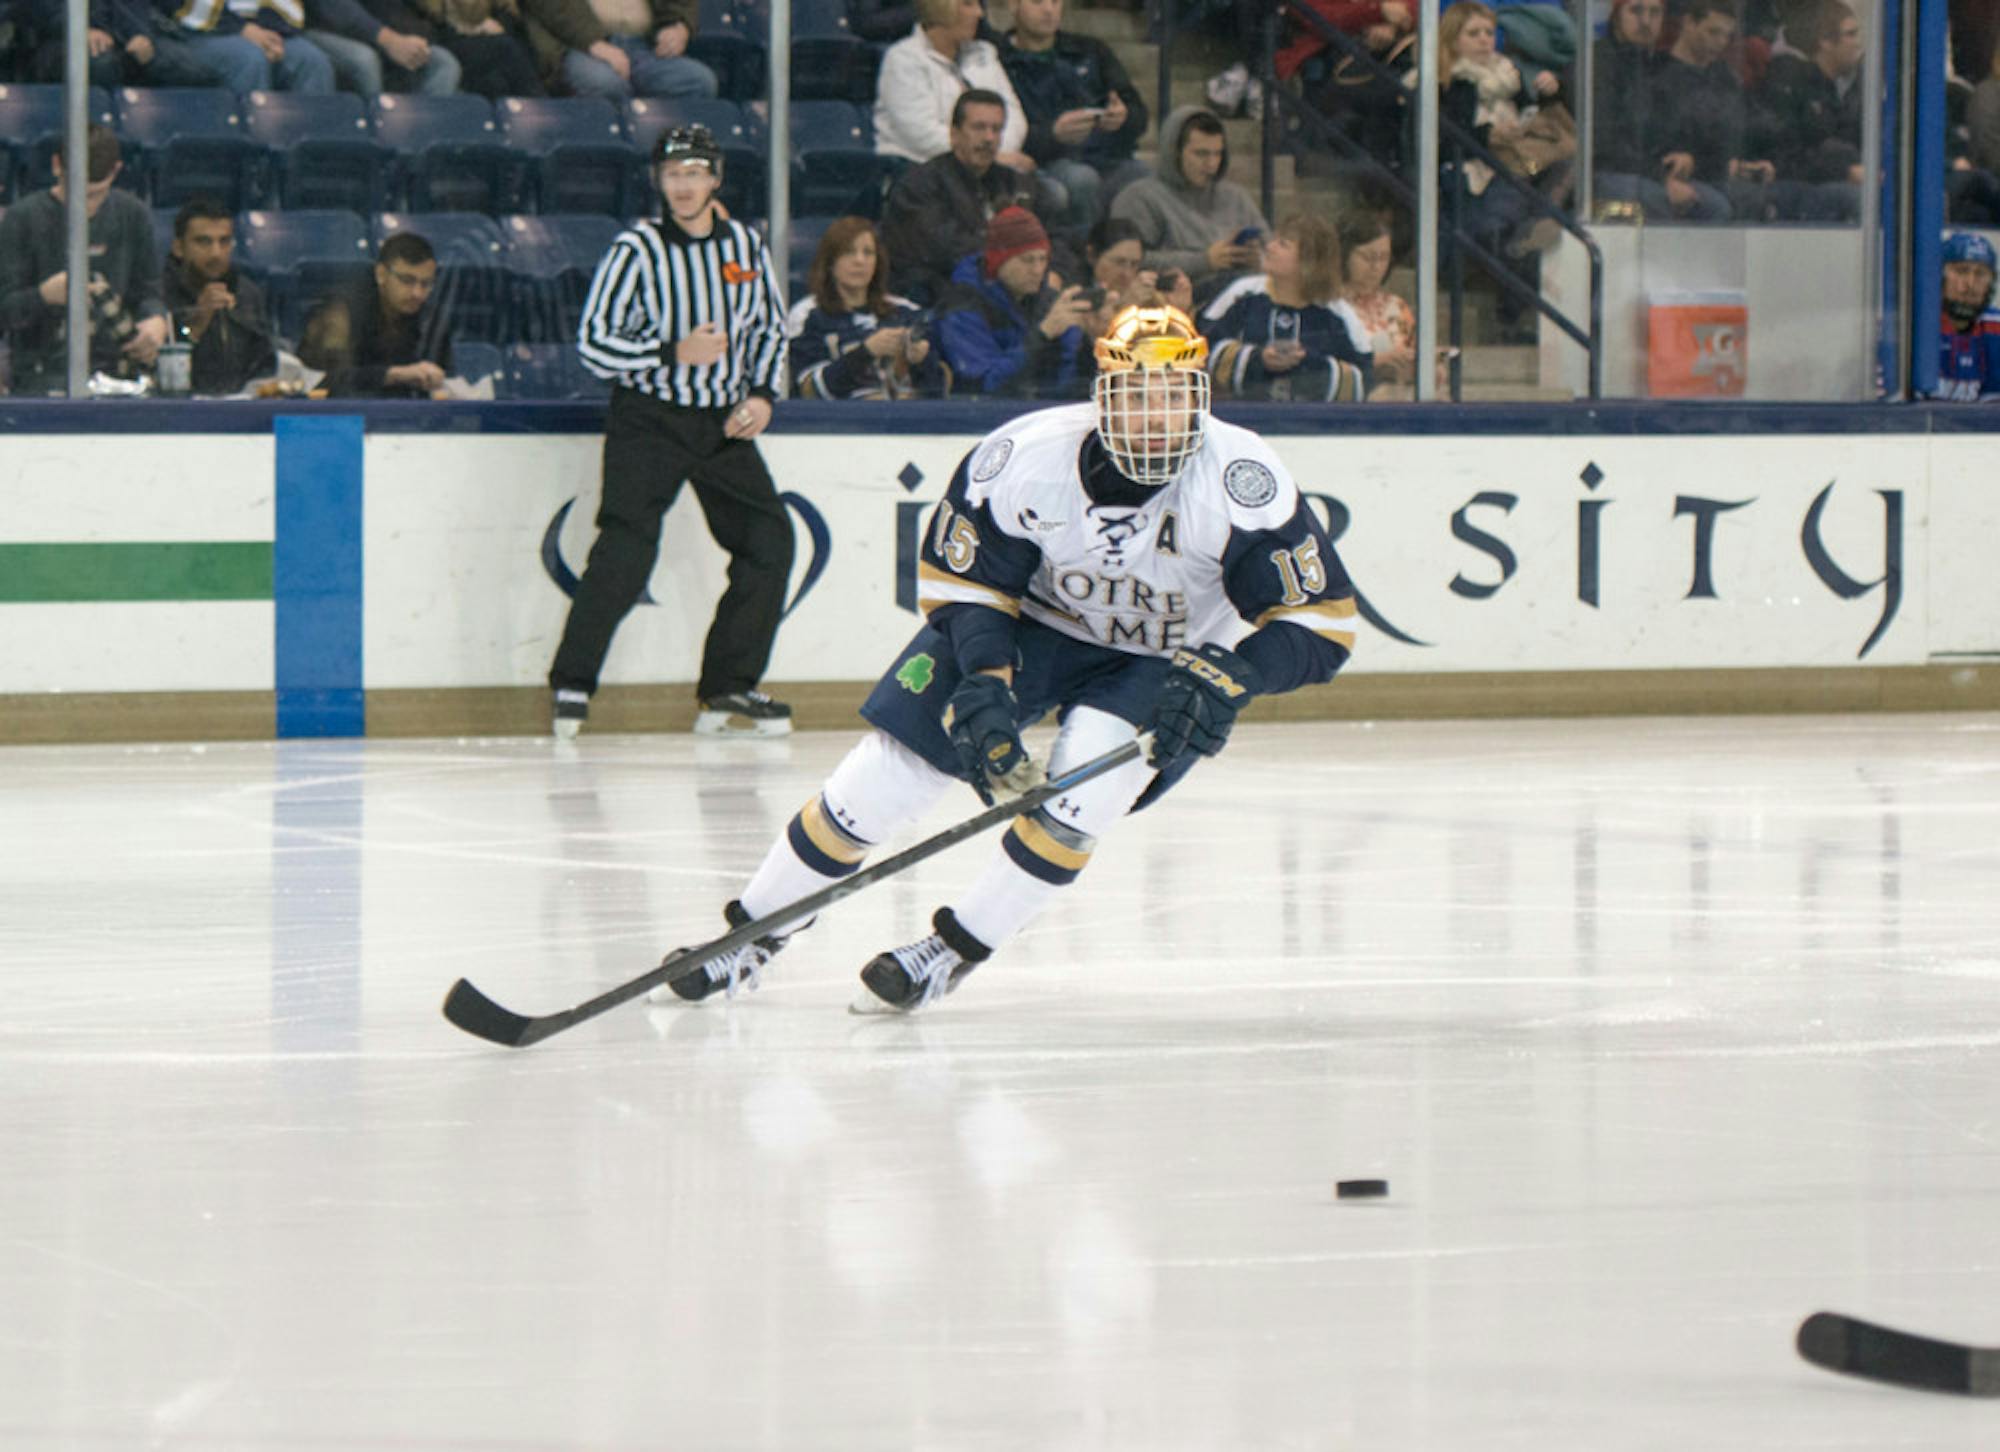 Irish senior right winger Peter Schneider skates after a loose puck during Notre Dame’s 2-2 tie with UMass-Lowell on Nov. 21.